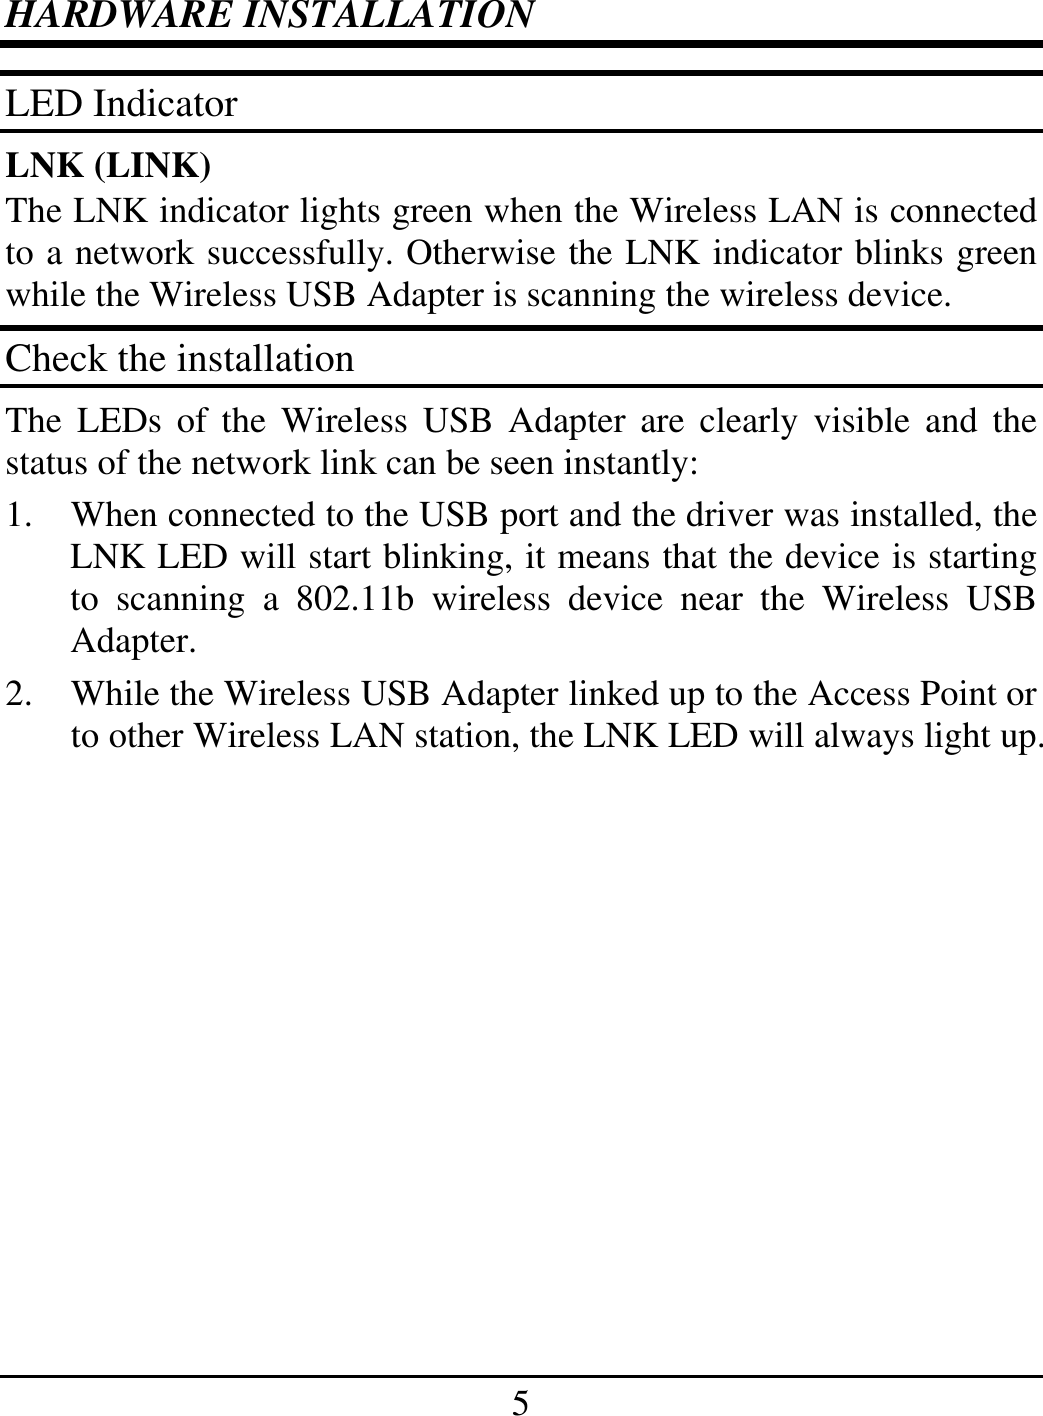 5 HARDWARE INSTALLATION LED Indicator LNK (LINK) The LNK indicator lights green when the Wireless LAN is connected to a network successfully. Otherwise the LNK indicator blinks green while the Wireless USB Adapter is scanning the wireless device. Check the installation The LEDs of the Wireless USB Adapter are clearly visible and the status of the network link can be seen instantly: 1.  When connected to the USB port and the driver was installed, the LNK LED will start blinking, it means that the device is starting to scanning a 802.11b wireless device near the Wireless USB Adapter. 2.  While the Wireless USB Adapter linked up to the Access Point or to other Wireless LAN station, the LNK LED will always light up.  